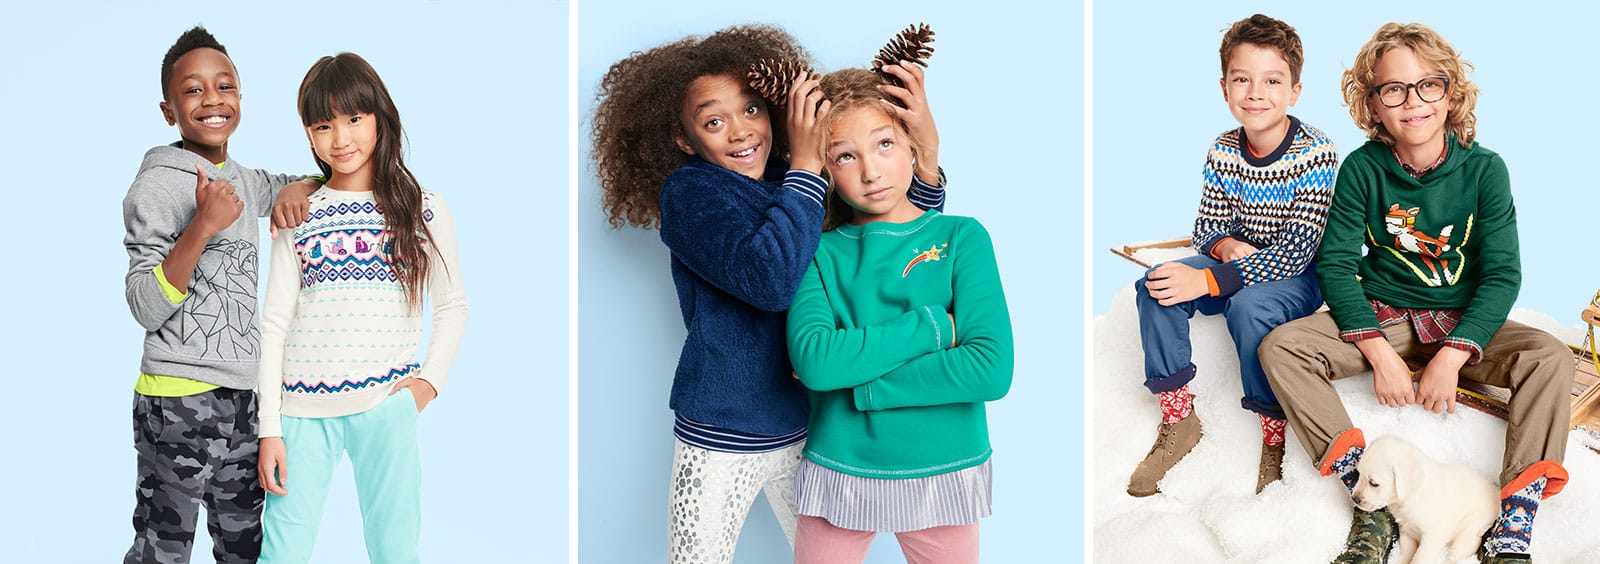 Clothing Gifts Your Kids Will Love to Open This Christmas | Lands' End